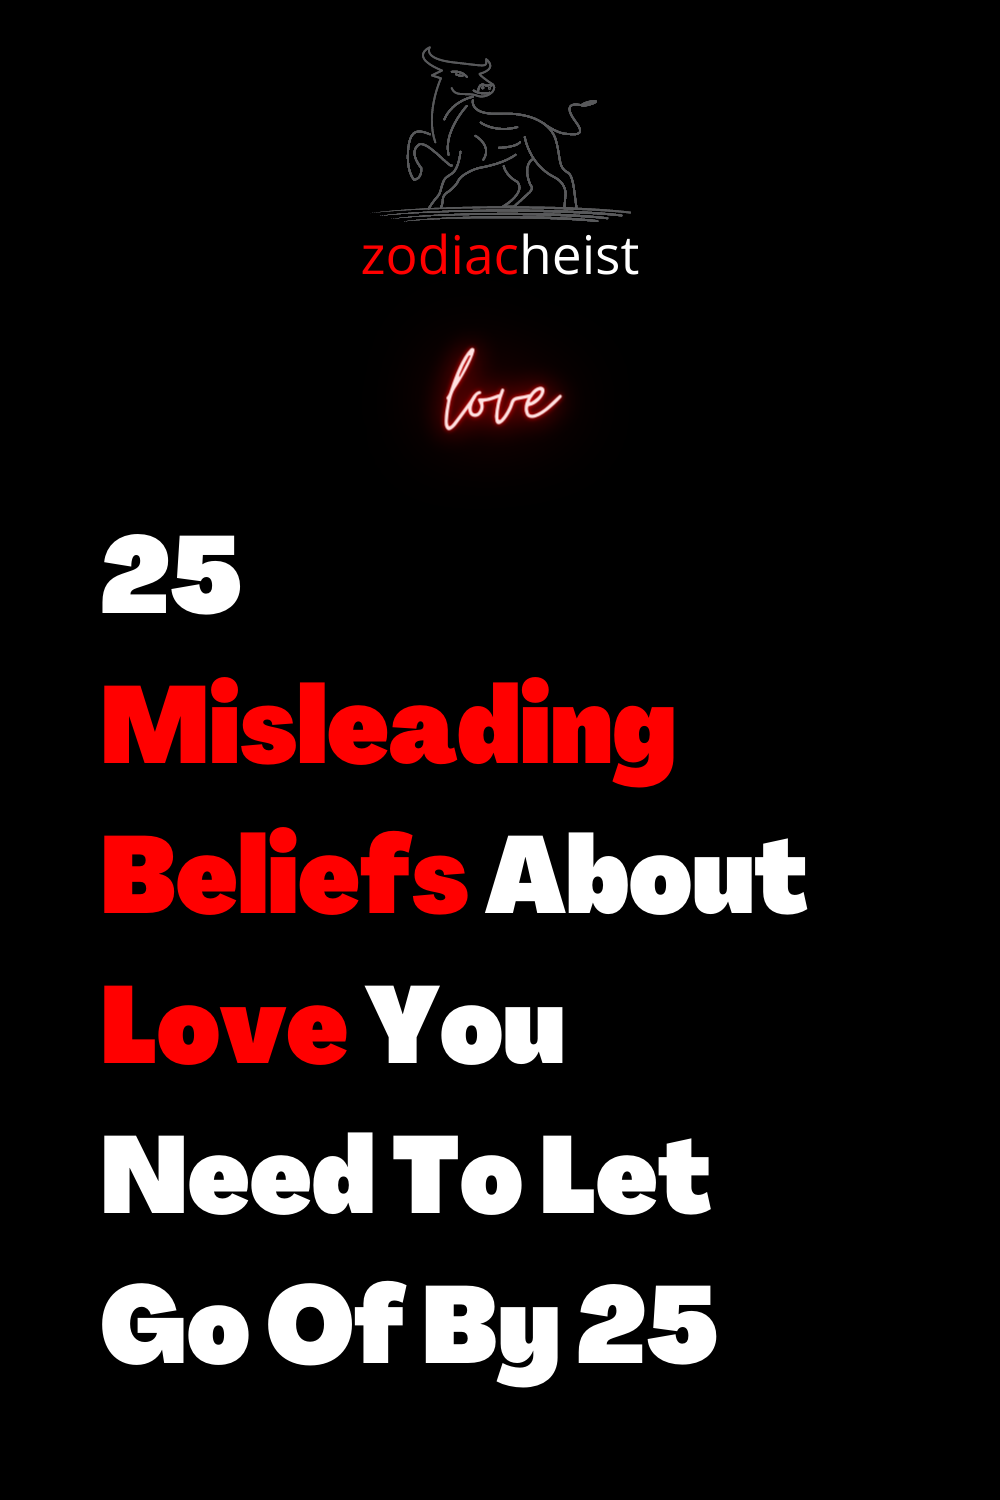 25 Misleading Beliefs About Love You Need To Let Go Of By 25